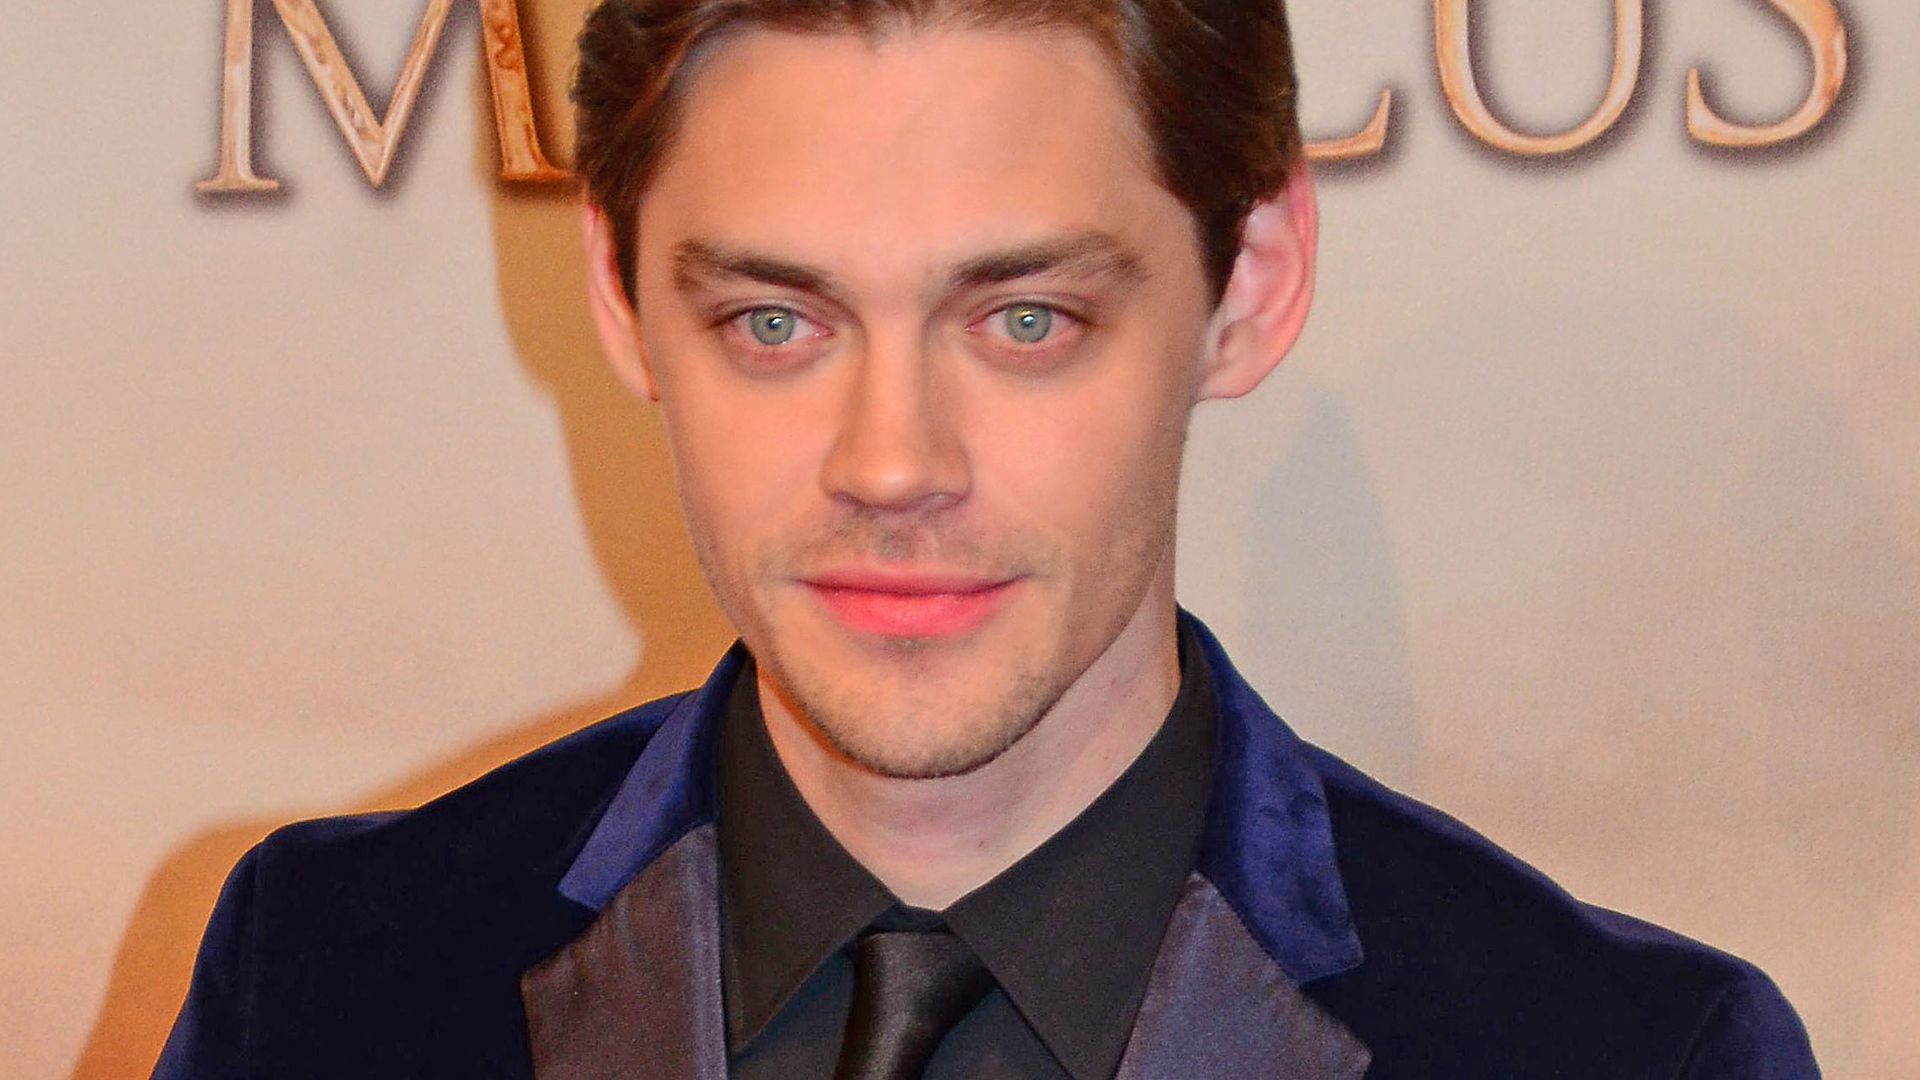 Tom Payne Wallpaper Image Photo Picture Background